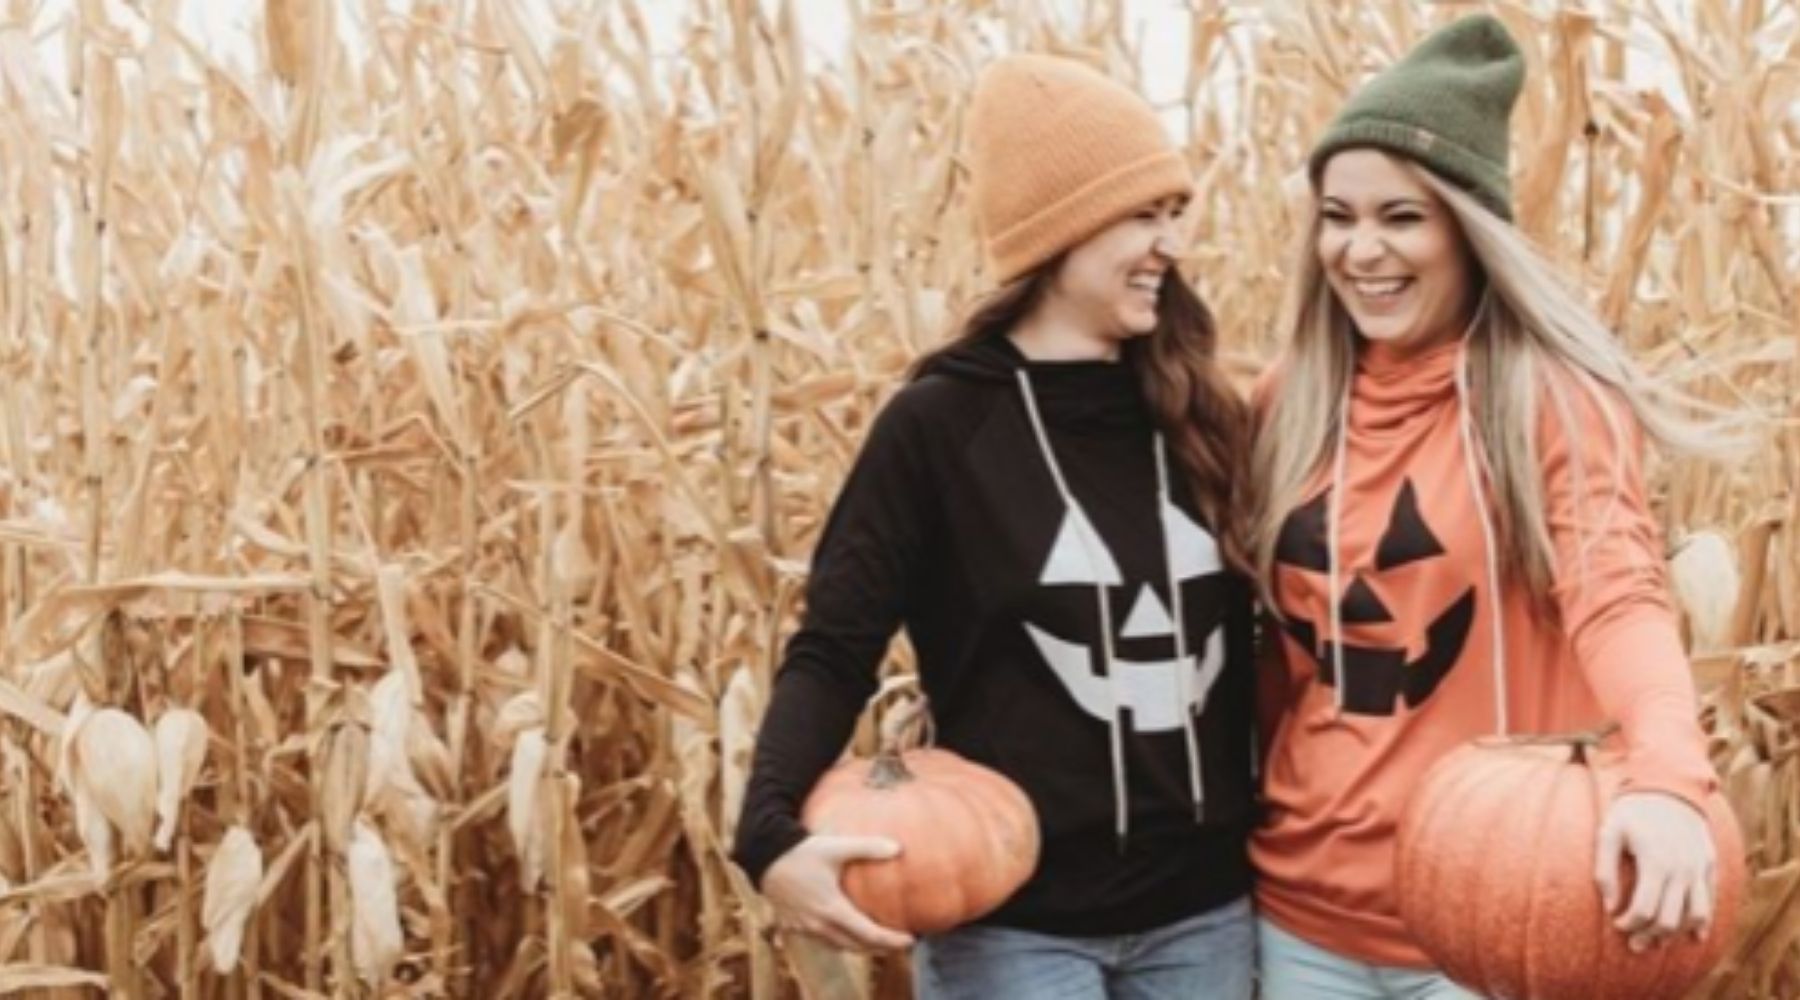 Beanies, Bonfires, and Blue Skies! How to Style a Beanie